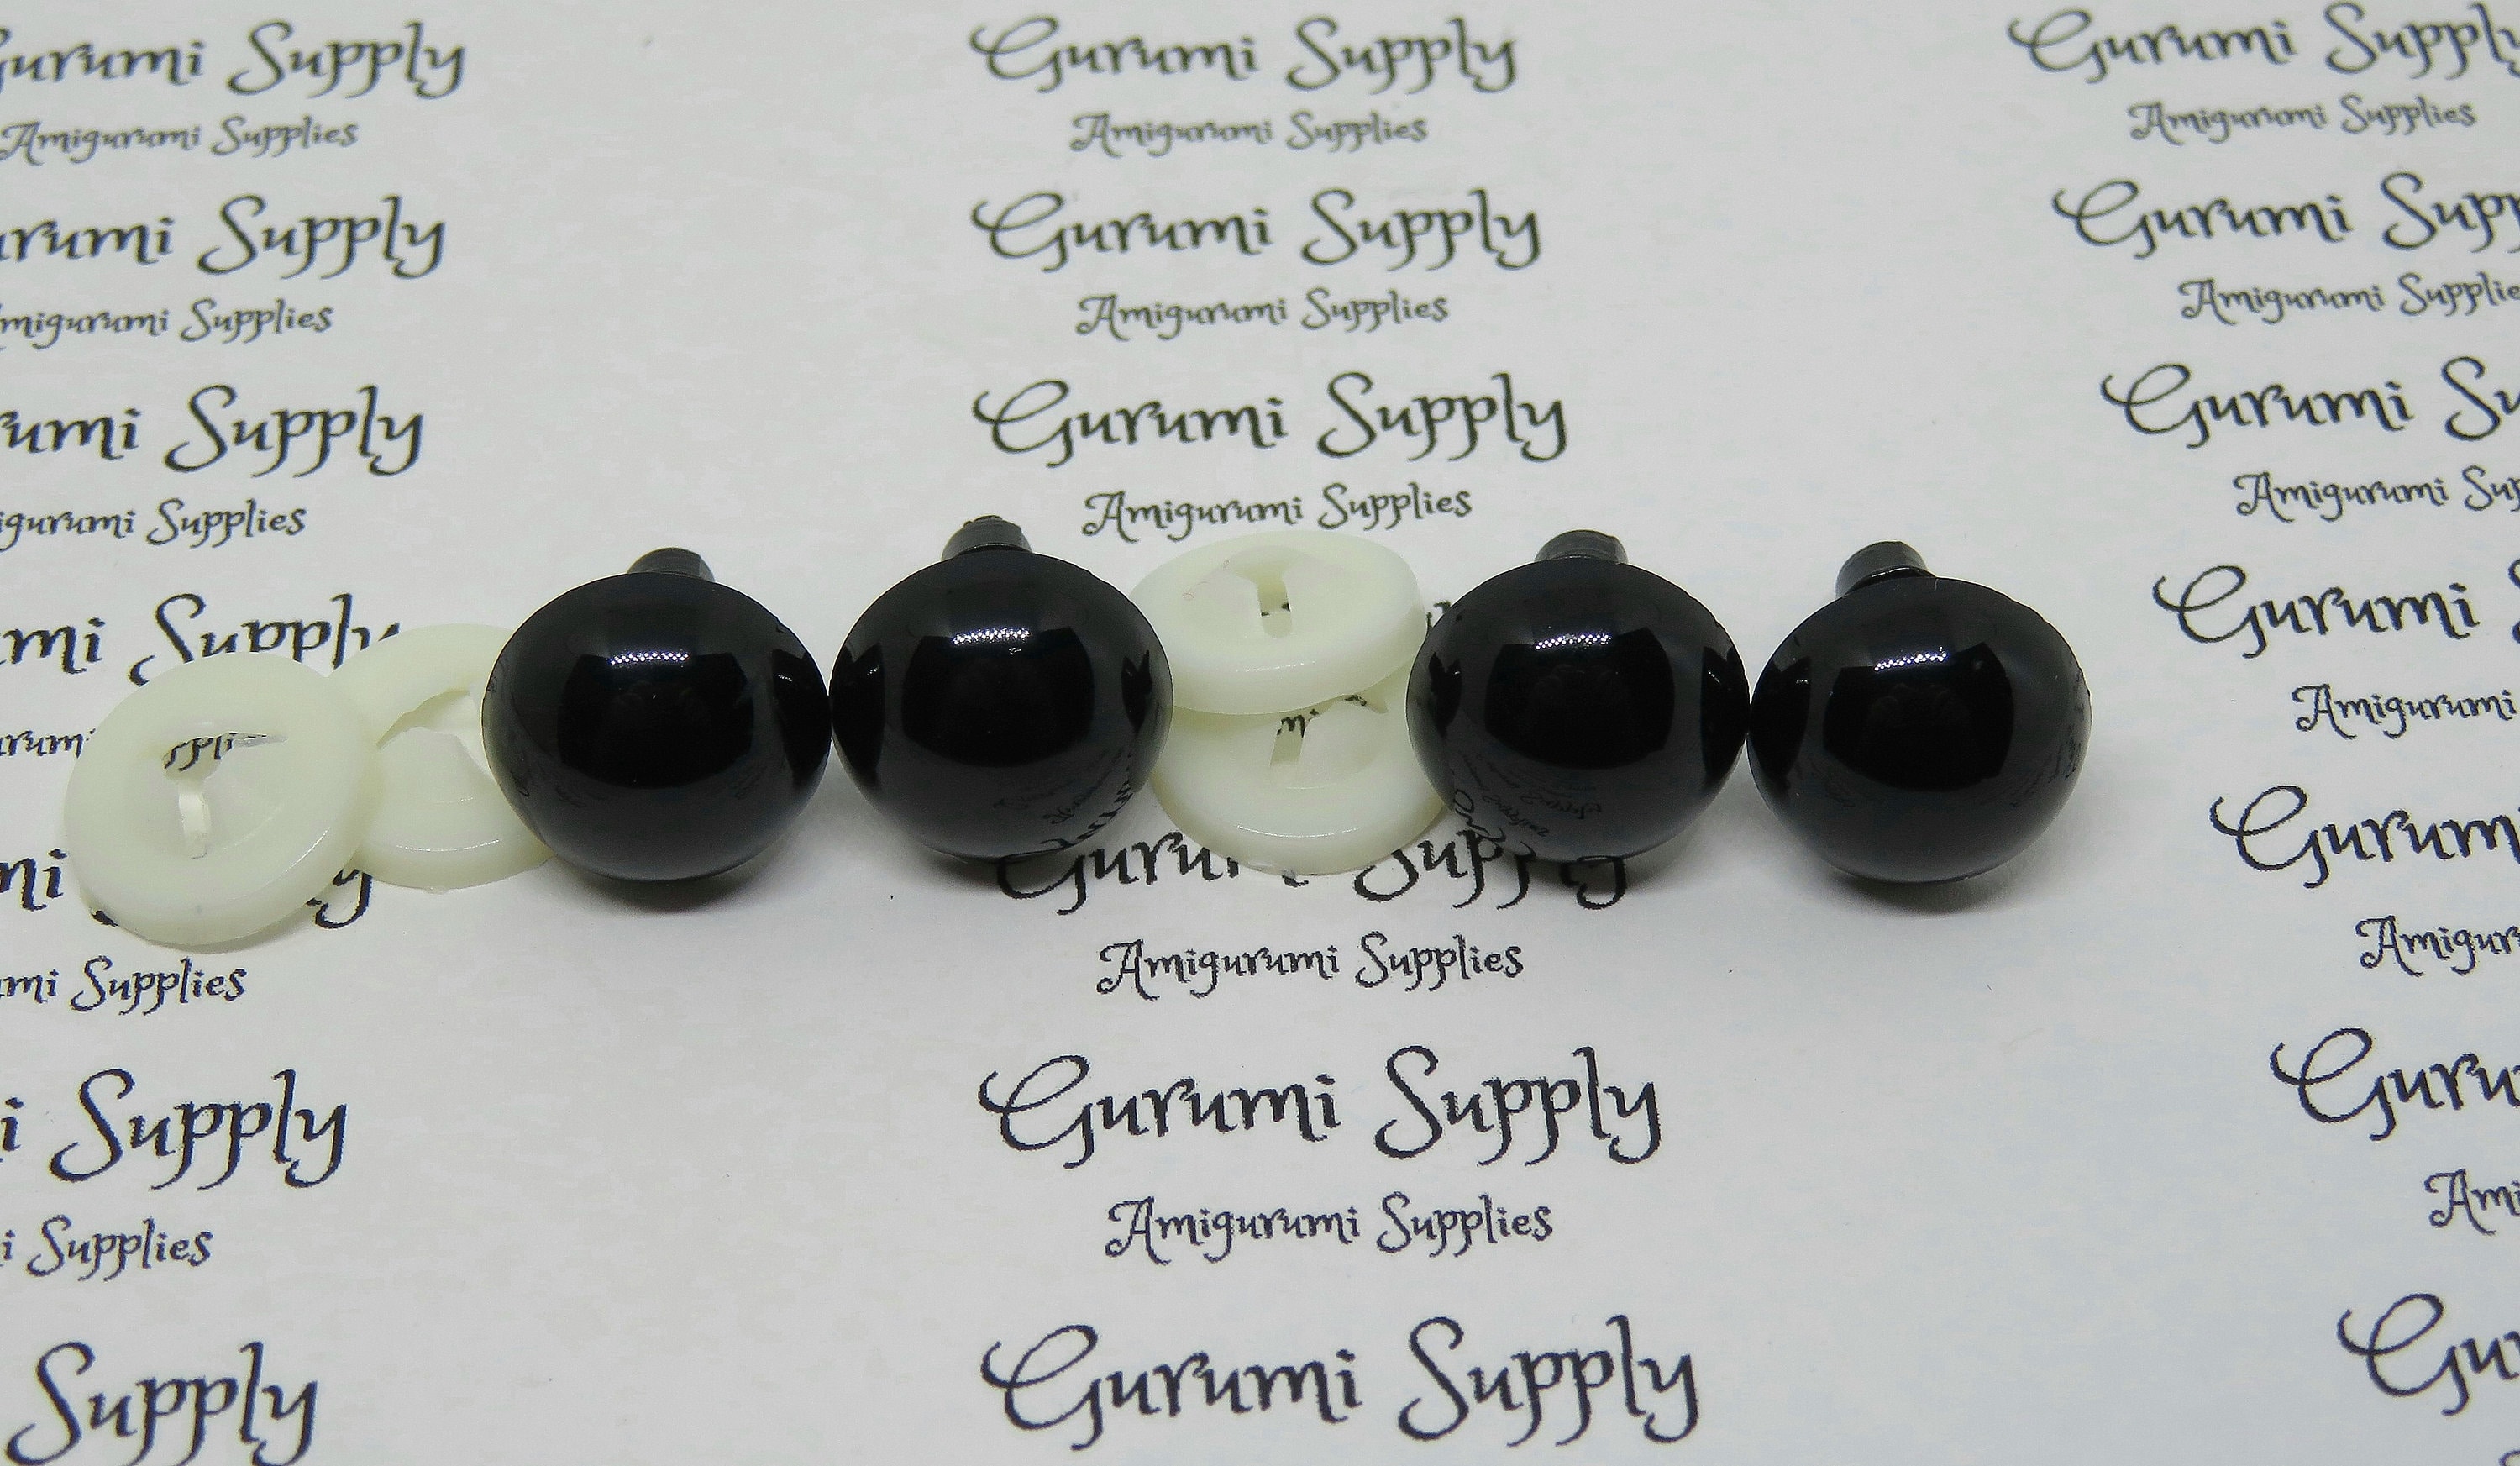 14mm Solid Black Round Safety Eyes with Washers: 2 Pair